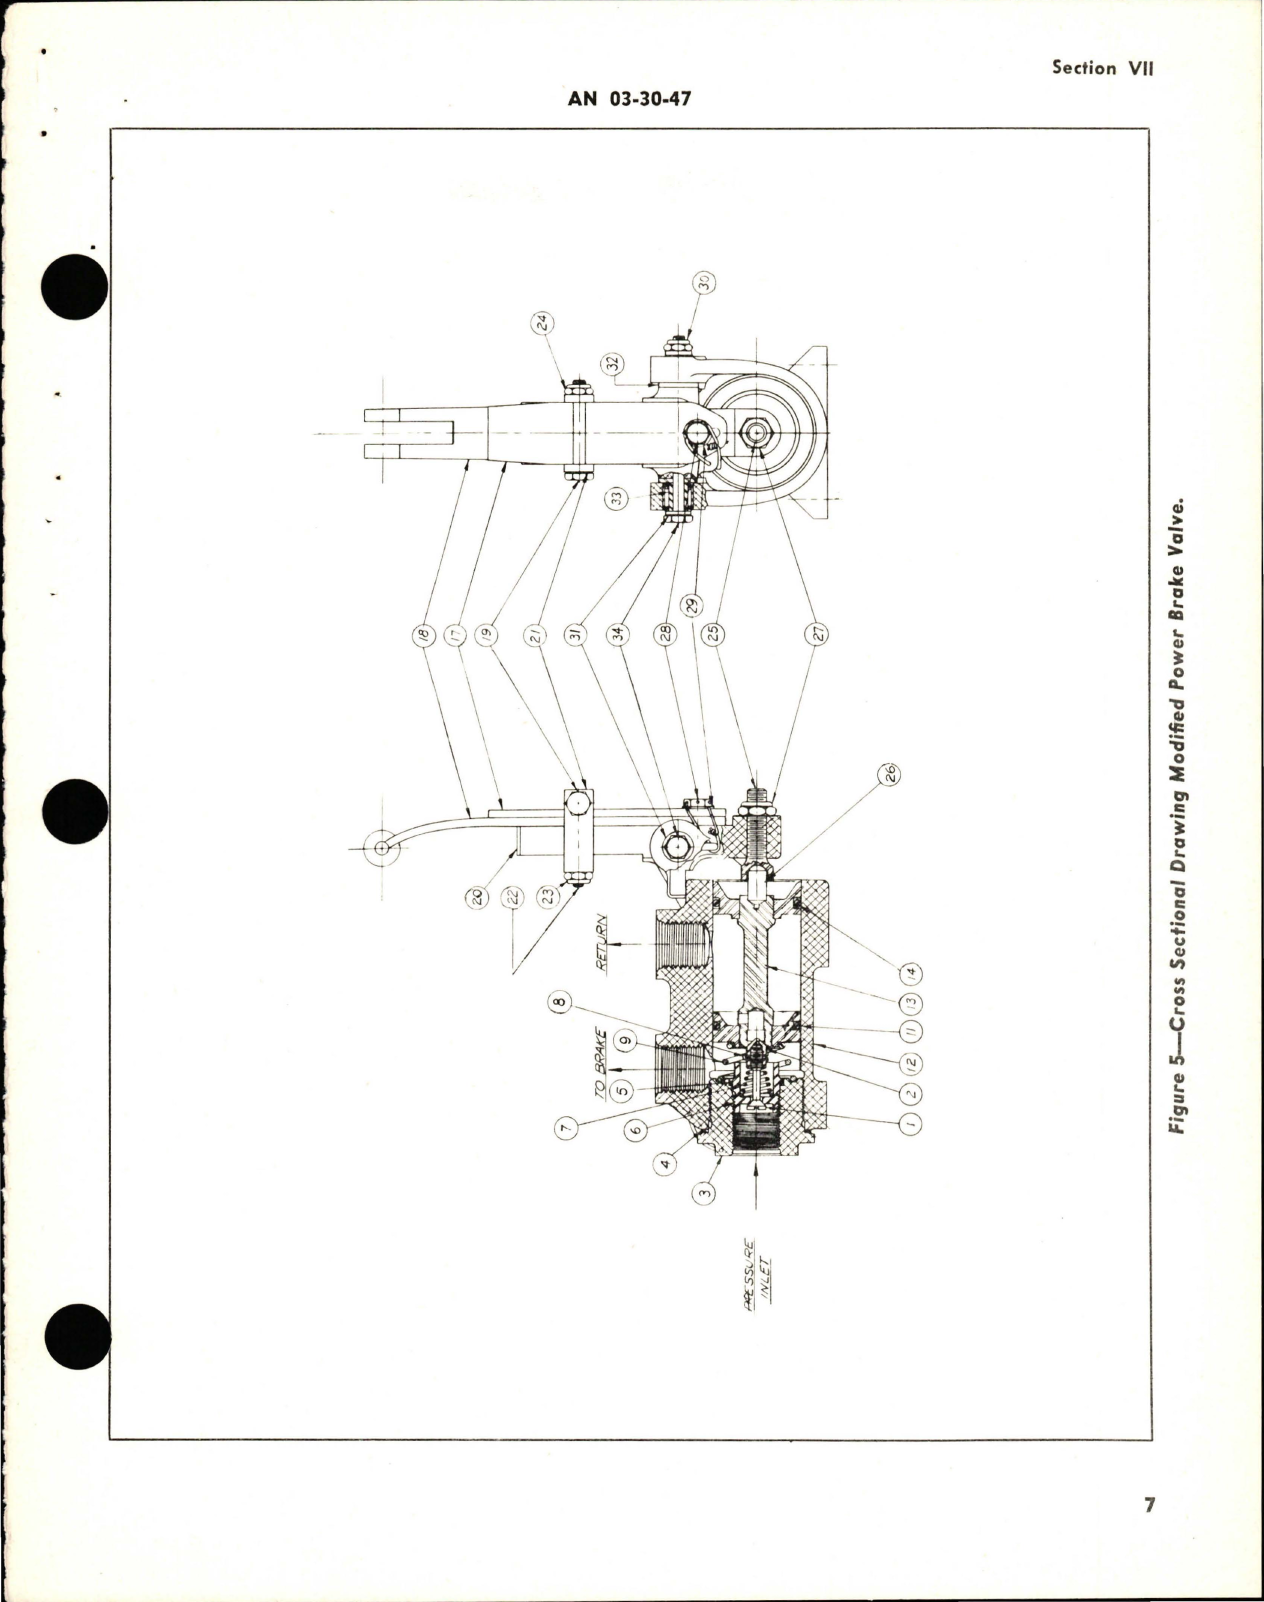 Sample page 7 from AirCorps Library document: Operation, Service, and Overhaul Instructions with Parts Catalog for Power Brake Valves